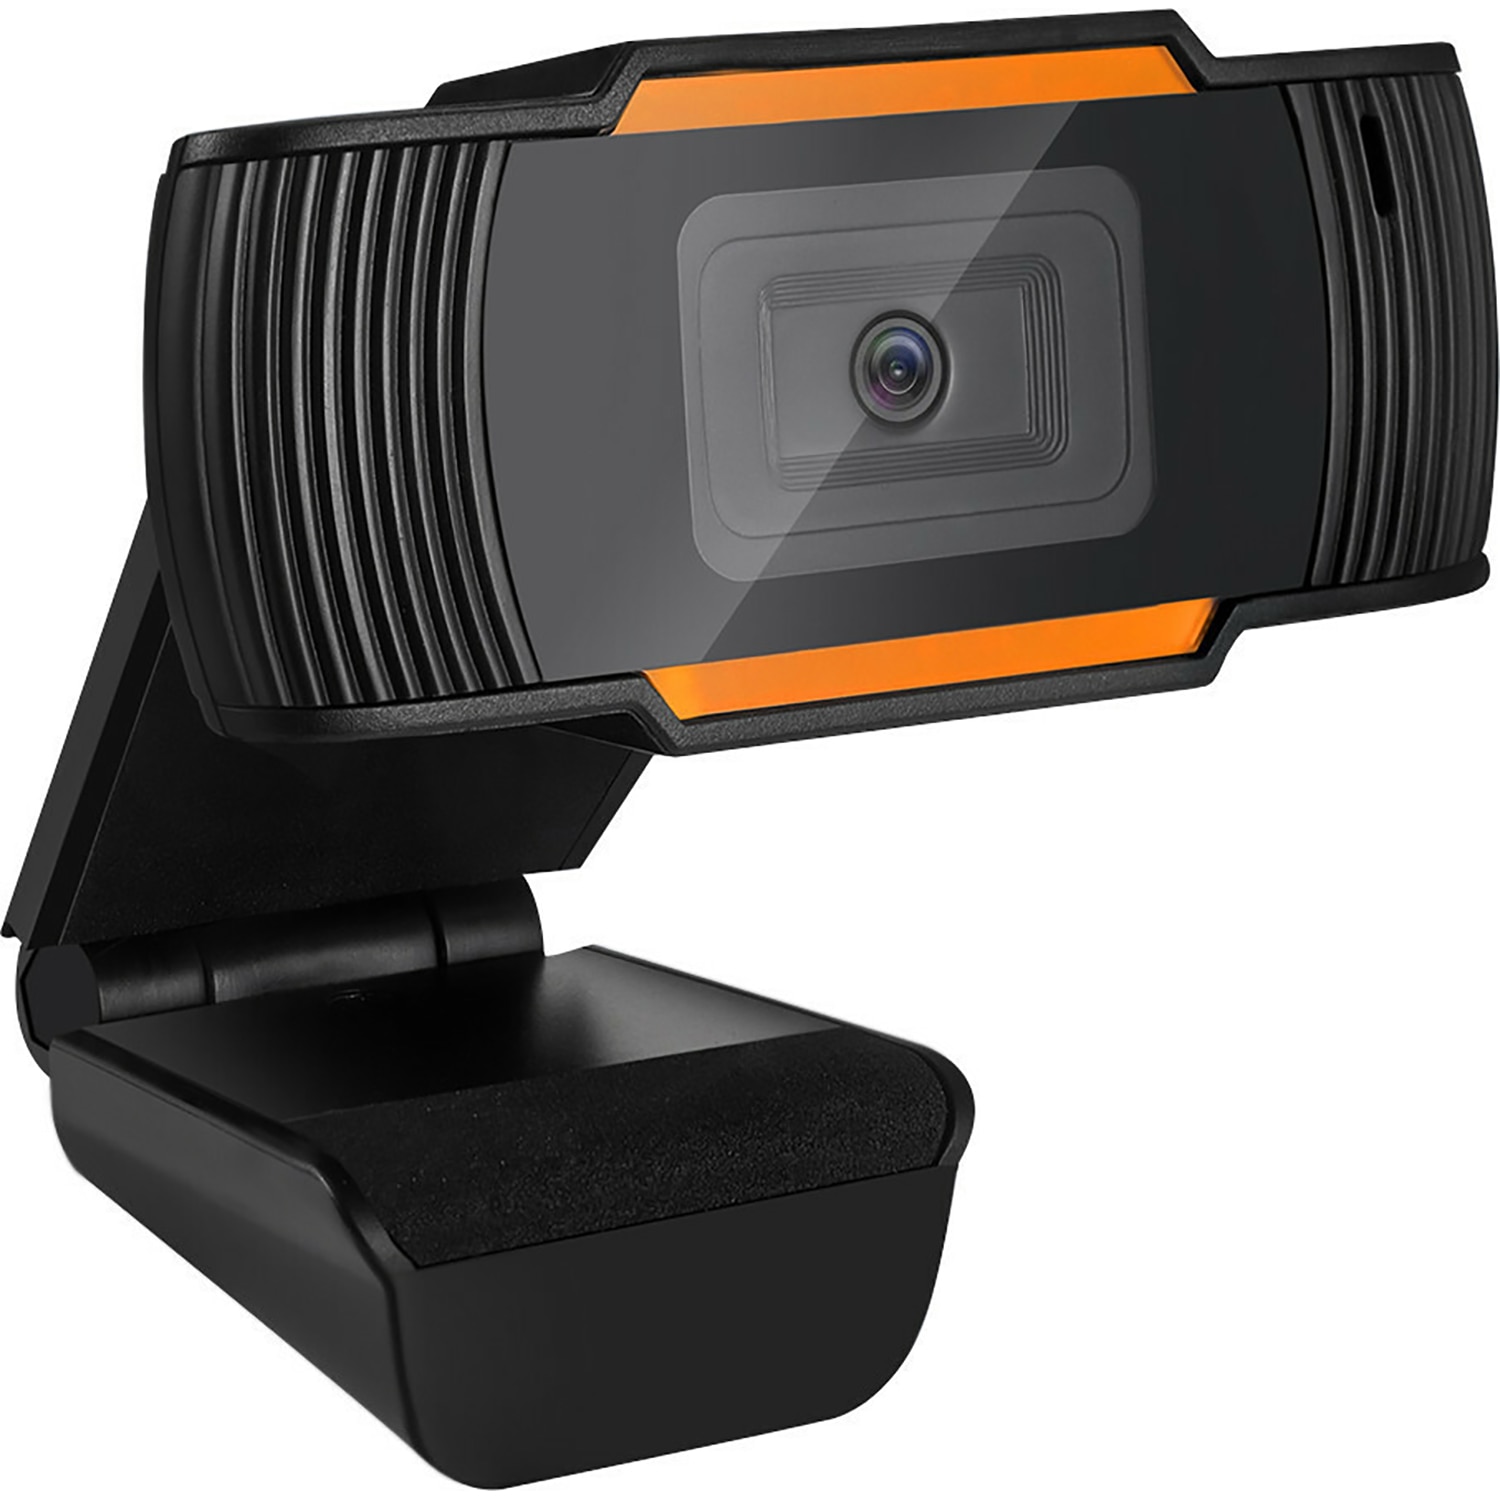 Adesso 480P HD USB Webcam with Built in Microphone